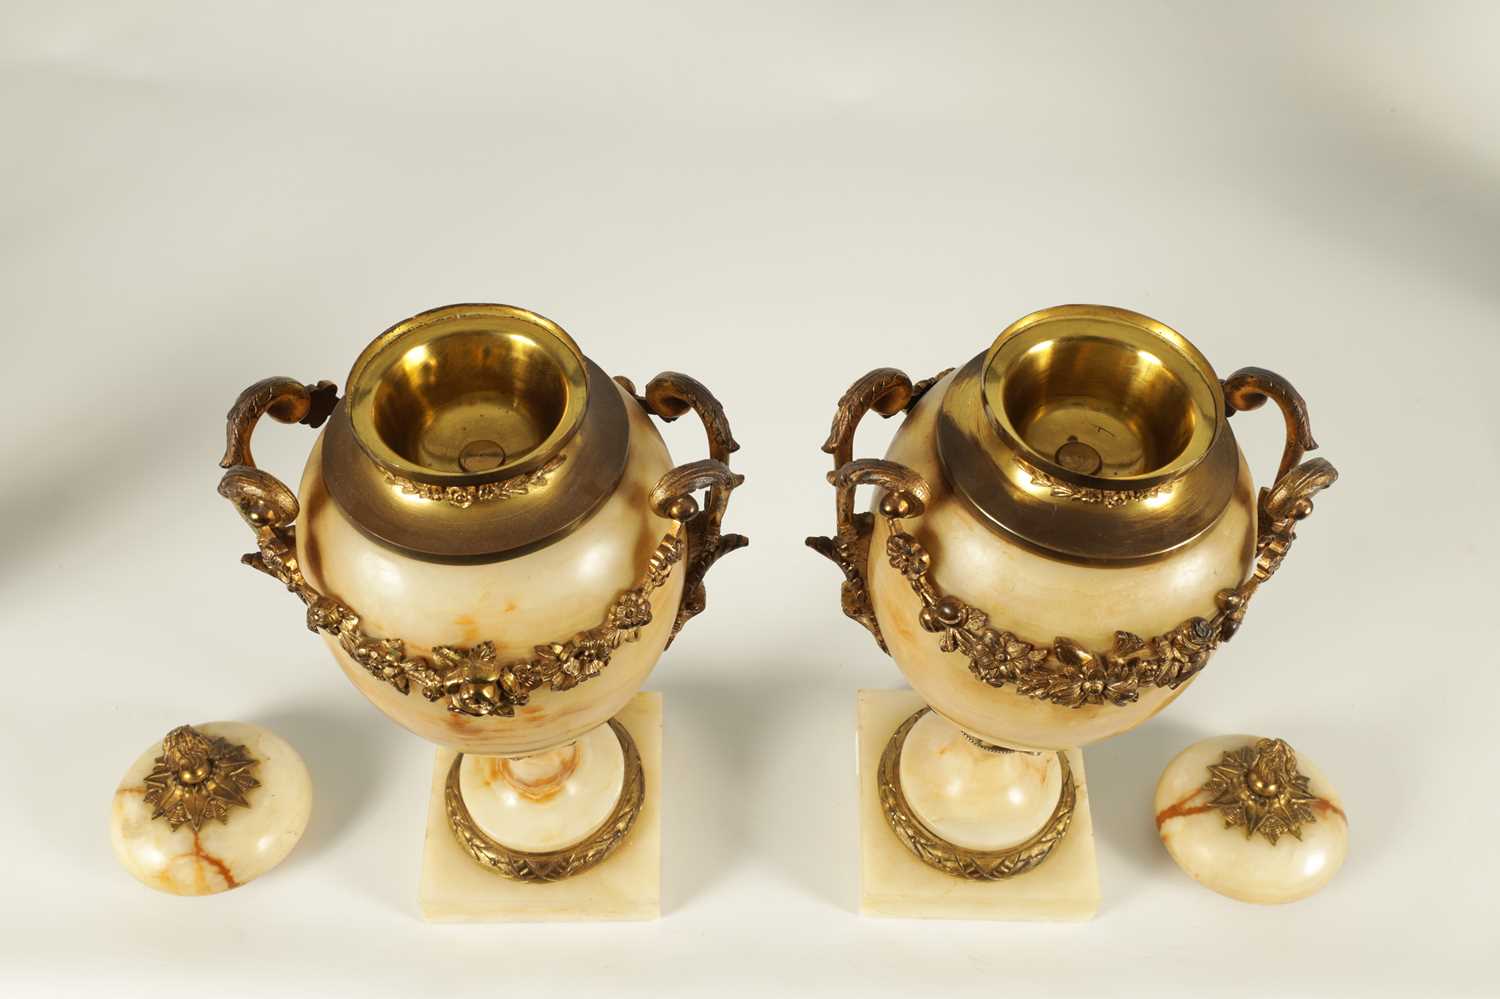 A PAIR OF 19TH CENTURY FRENCH SIENA MARBLE AND ORMOLU MOUNTED CASSOLETTES - Image 11 of 13